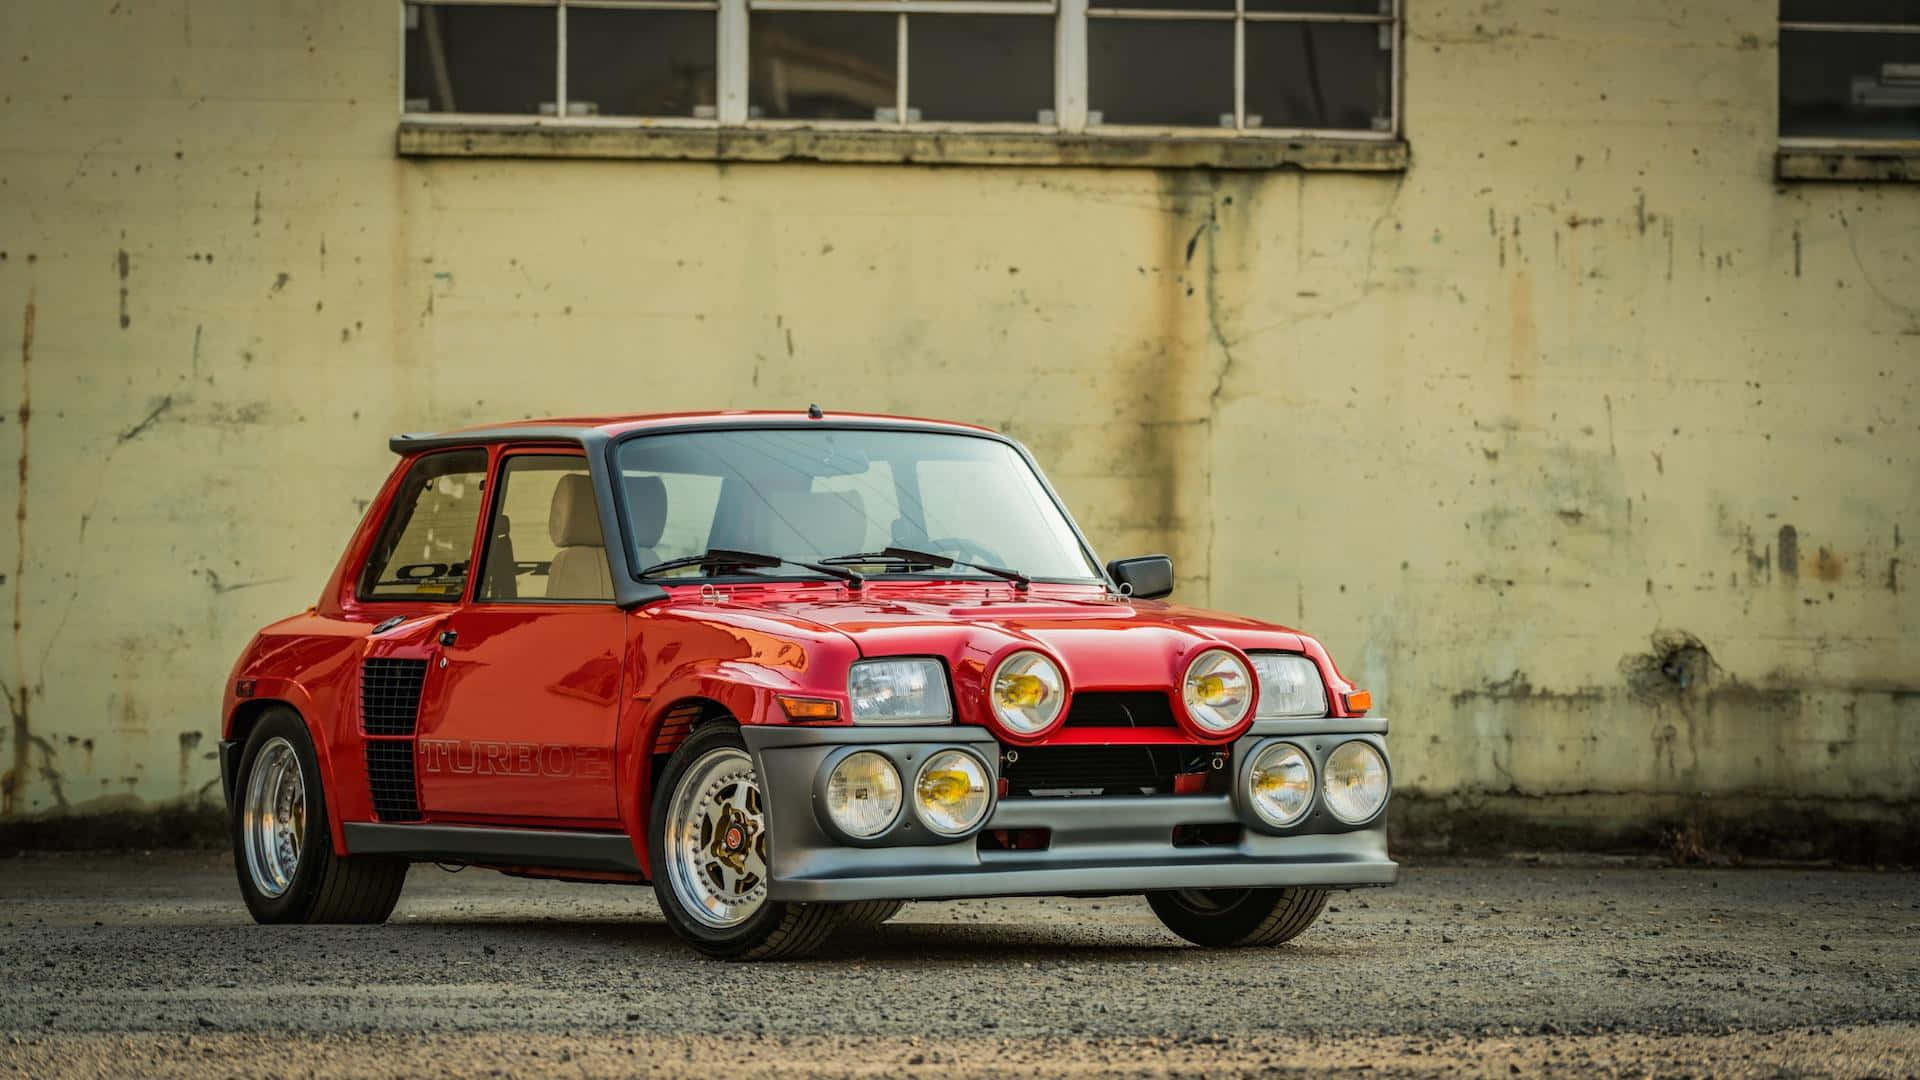 Classic Speed: The Renault 5 Turbo Wallpaper